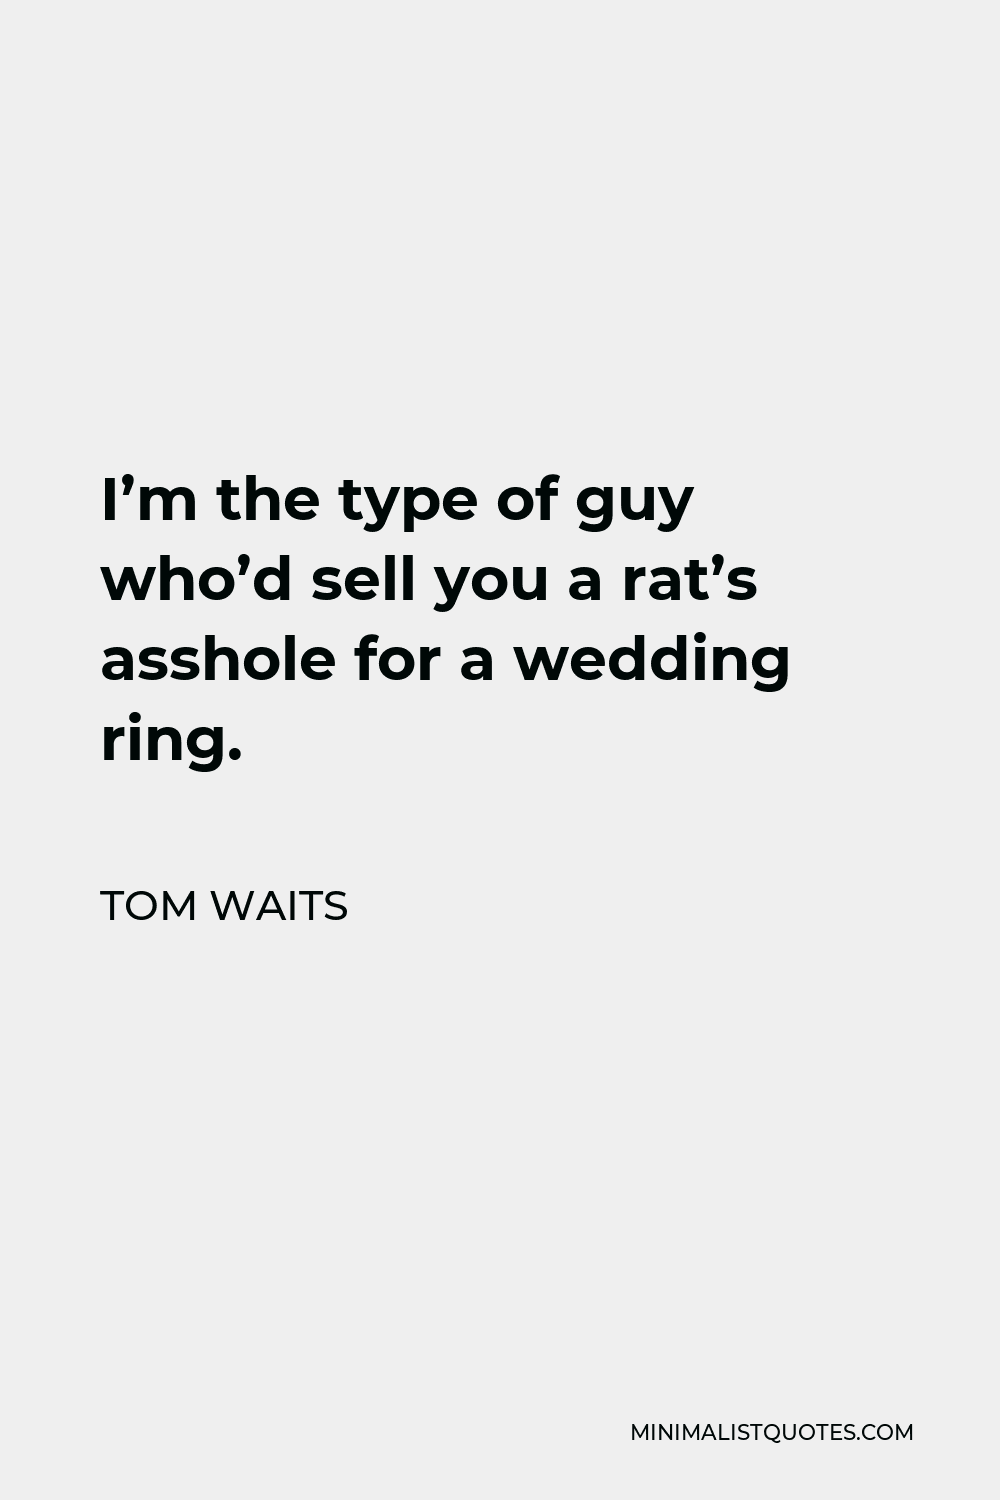 Tom Waits Quote - I’m the type of guy who’d sell you a rat’s asshole for a wedding ring.